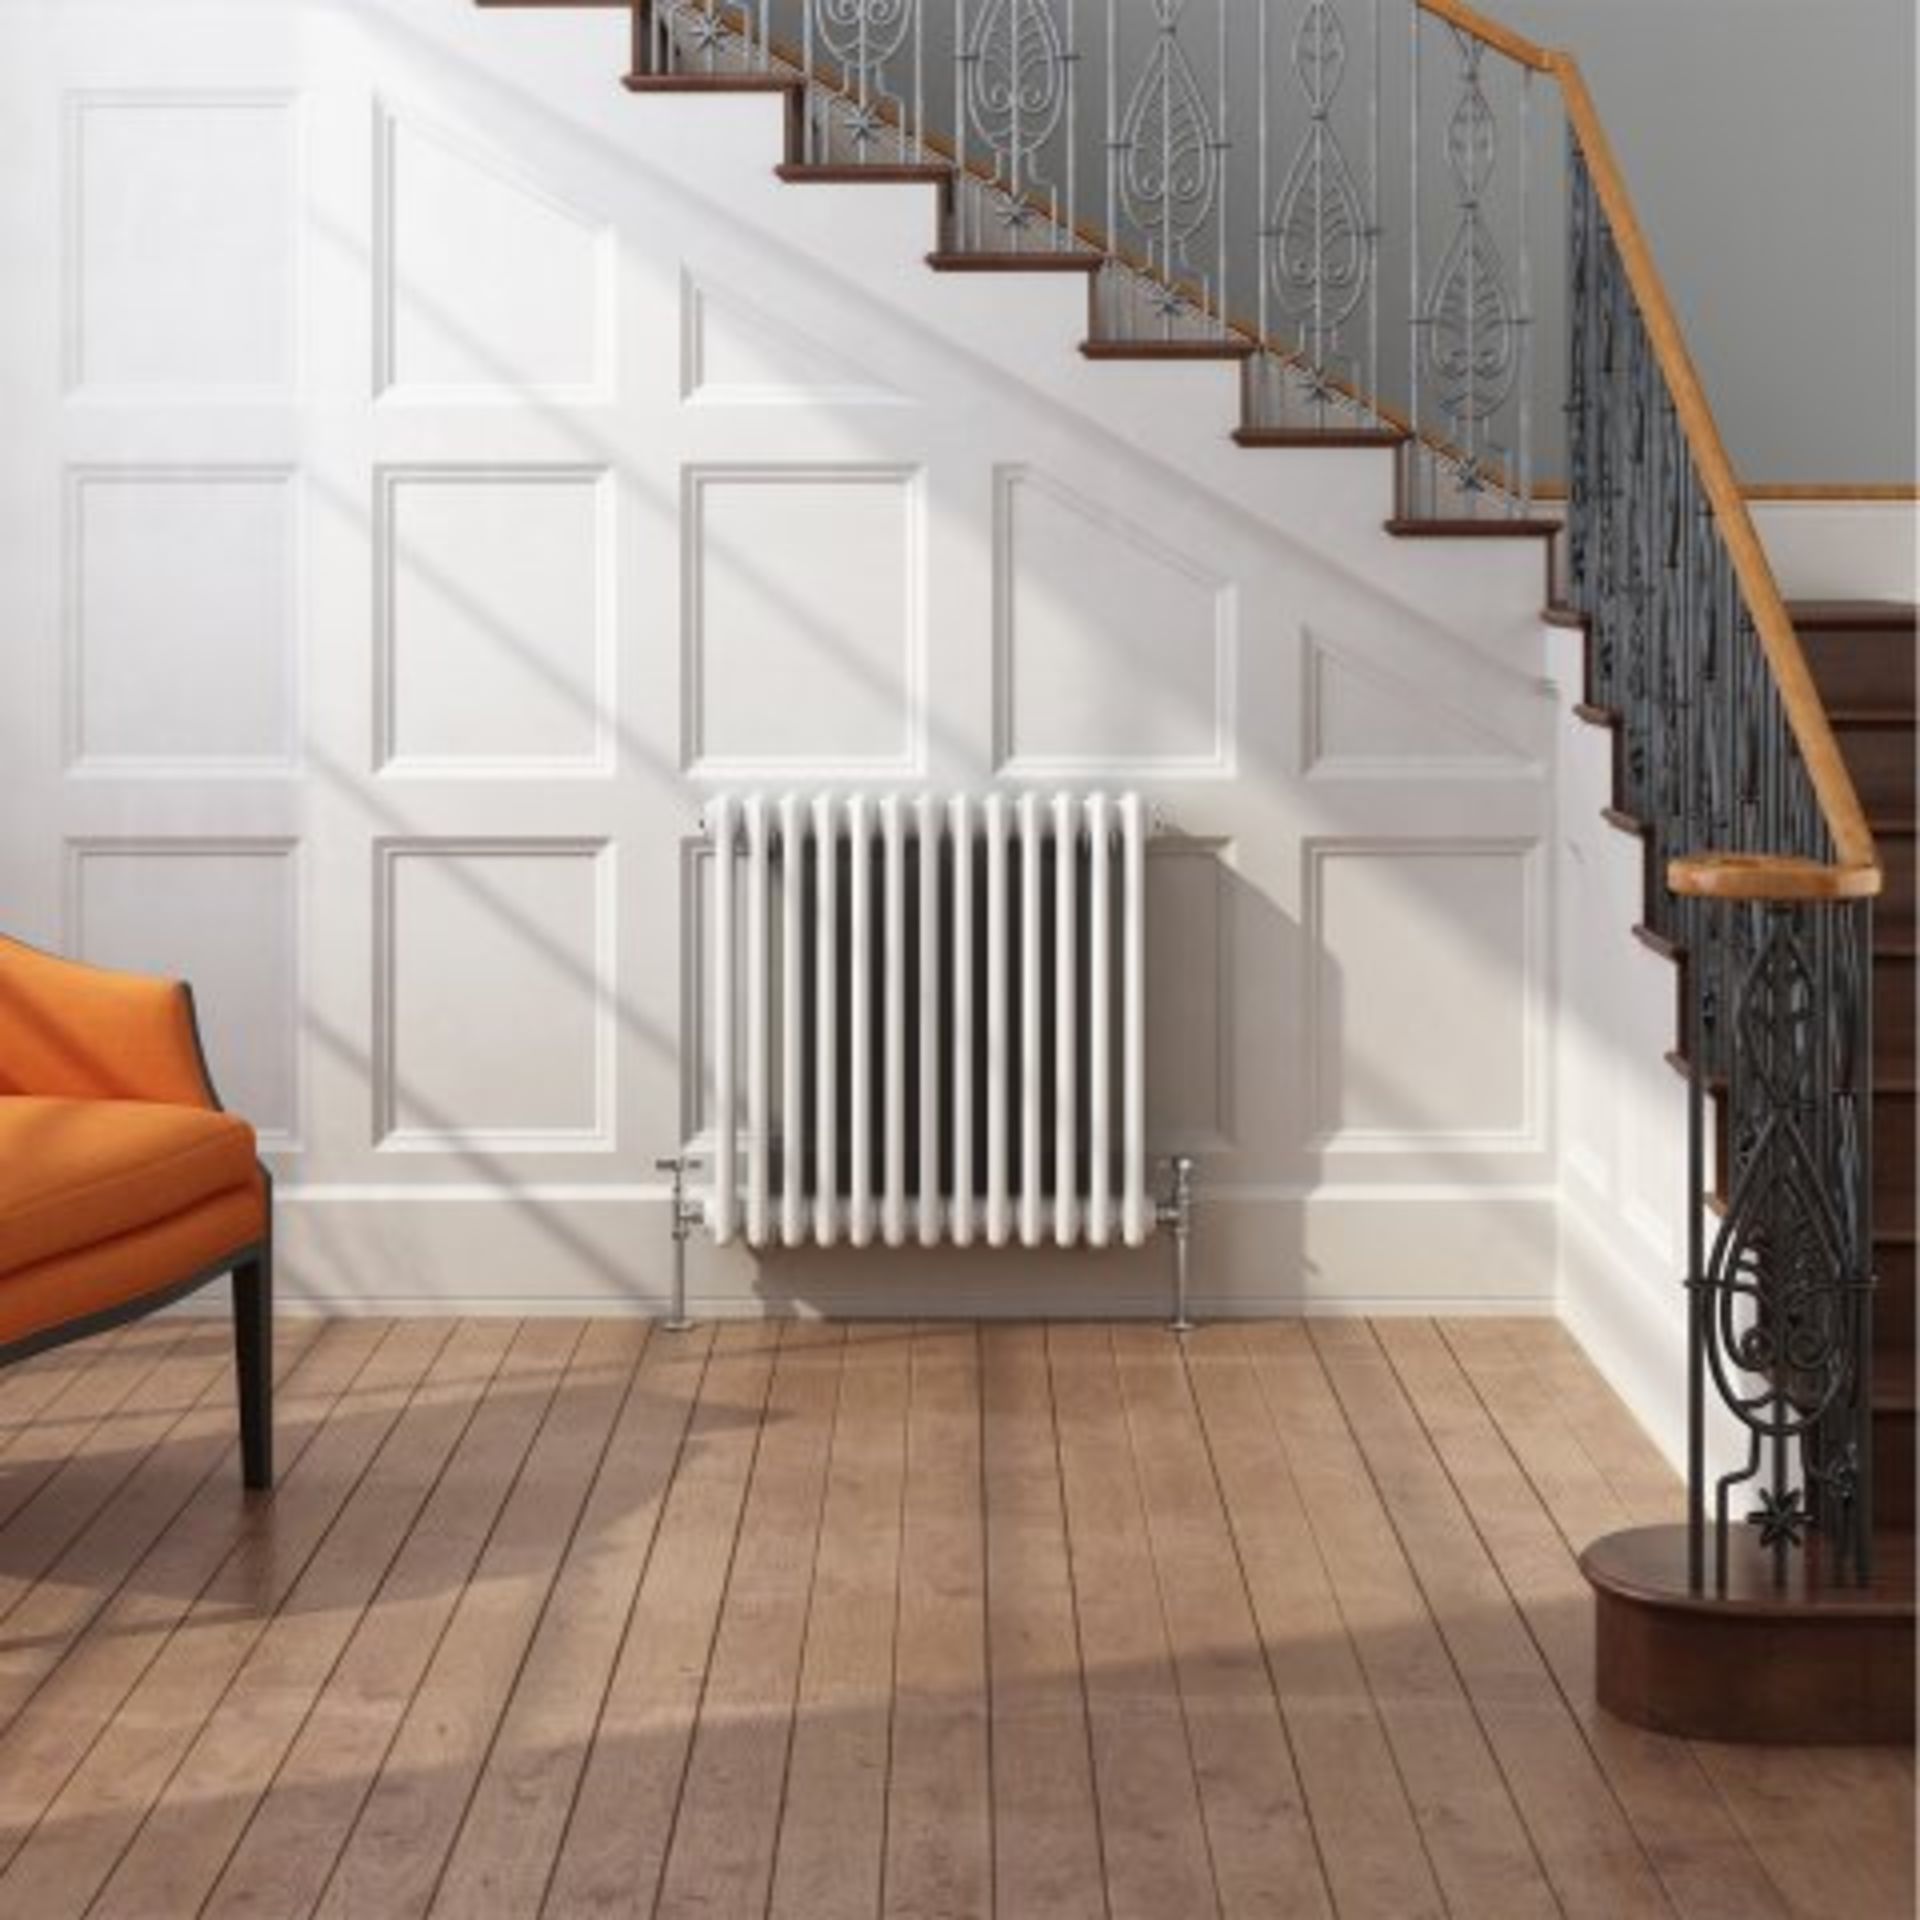 (J52) 600x603mm White Double Panel Horizontal Colosseum Traditional Radiator. RRP £307.99. Classic - Image 3 of 3